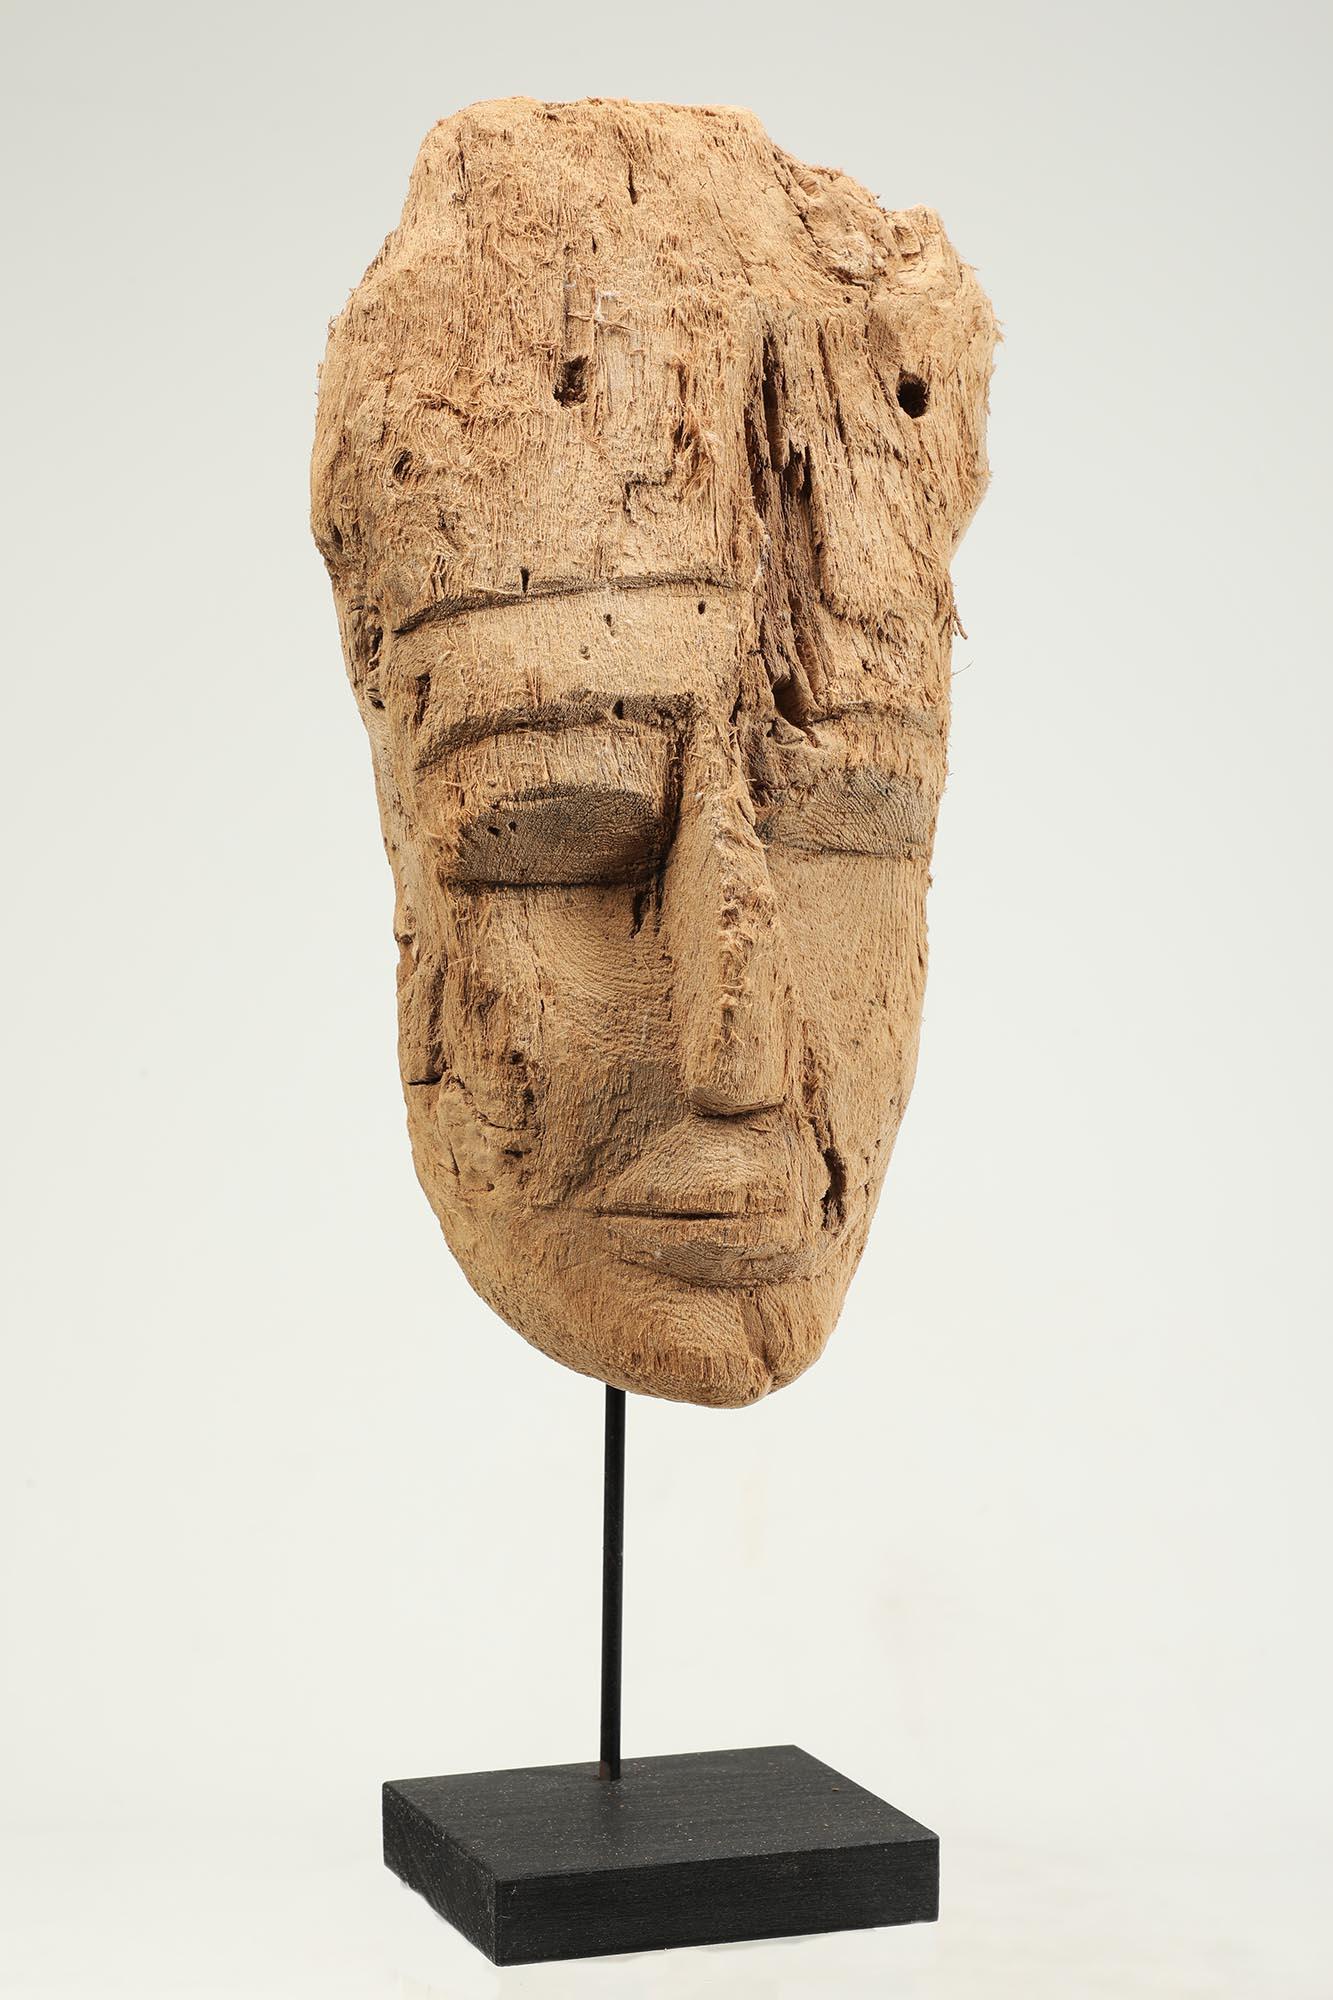 Ancient Egyptian cedar wood sarcophagus mummy mask.

Carved solid cedar wood Egyptian sarcophagus mask, weathered and eroded surface from age, pins on rear from attachment to sarcophagus. Mask is 11 inches high, on custom metal base, as shown, 16